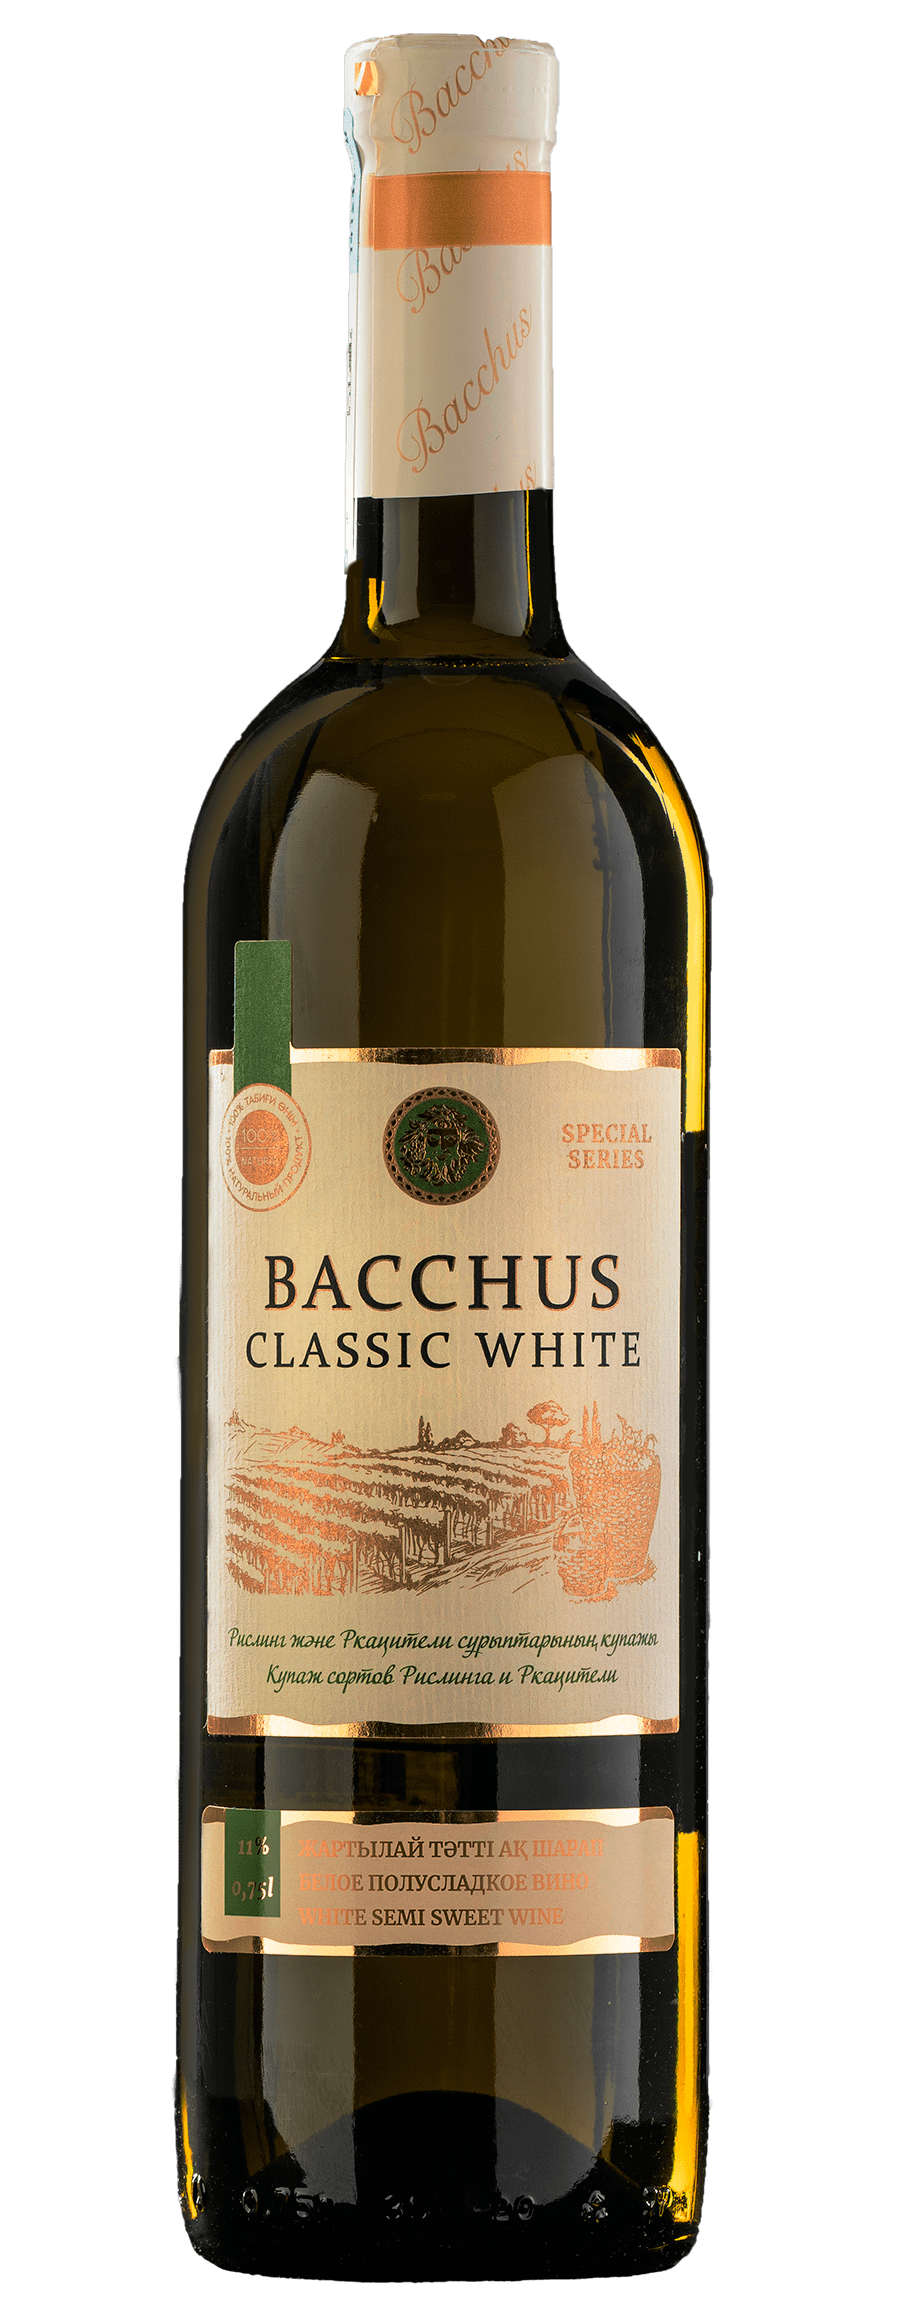 bacchus wines and spirits